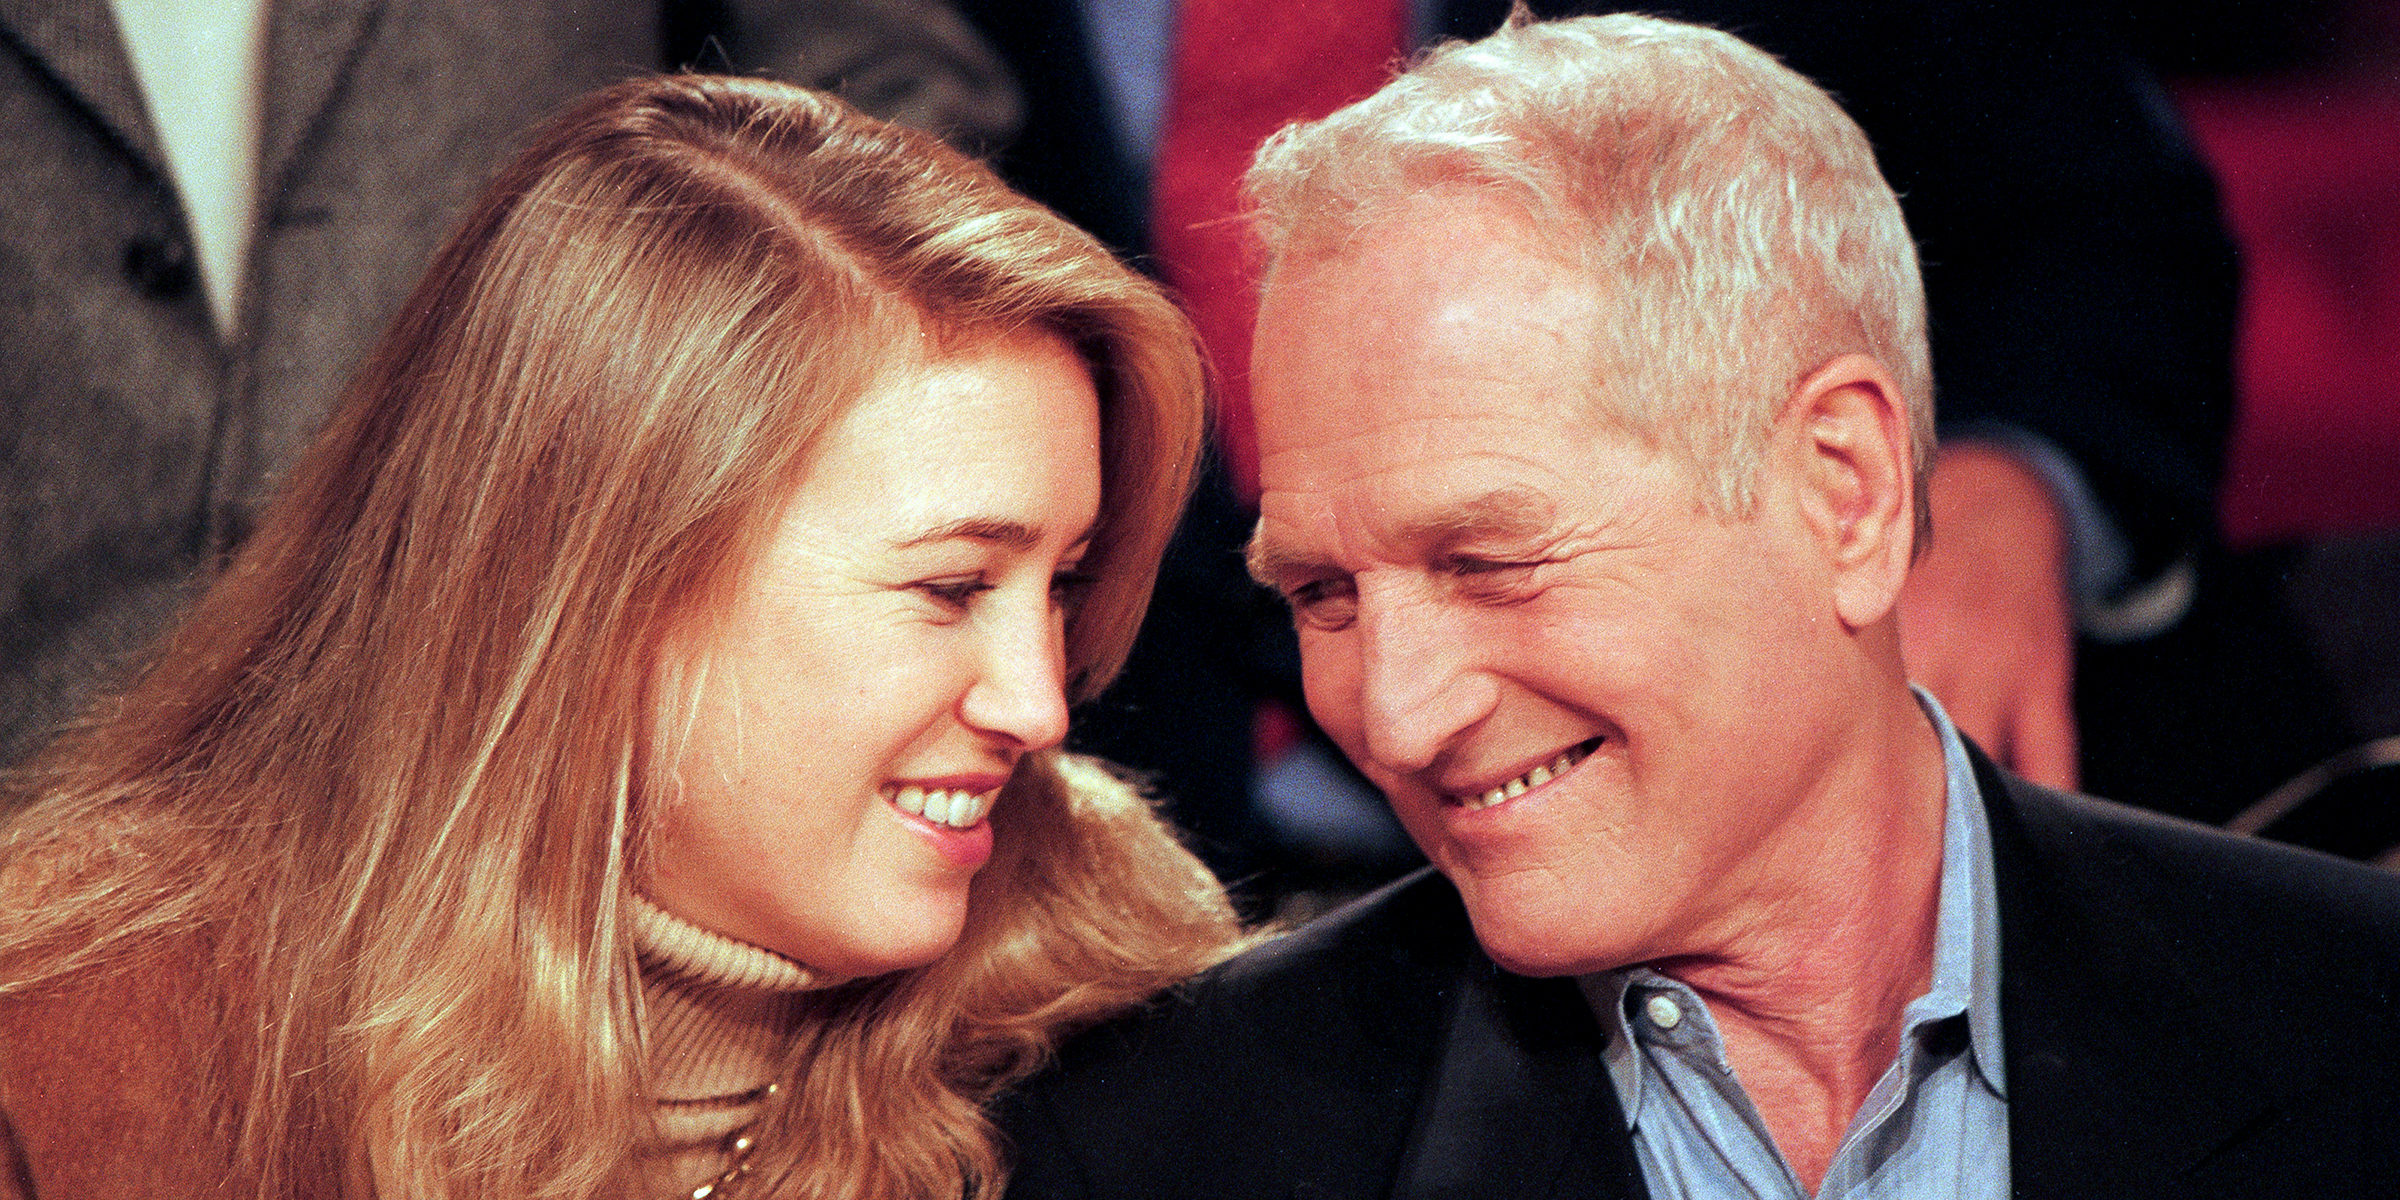 Claire Olivia Newman and her father Paul Newman | Source: Getty Images